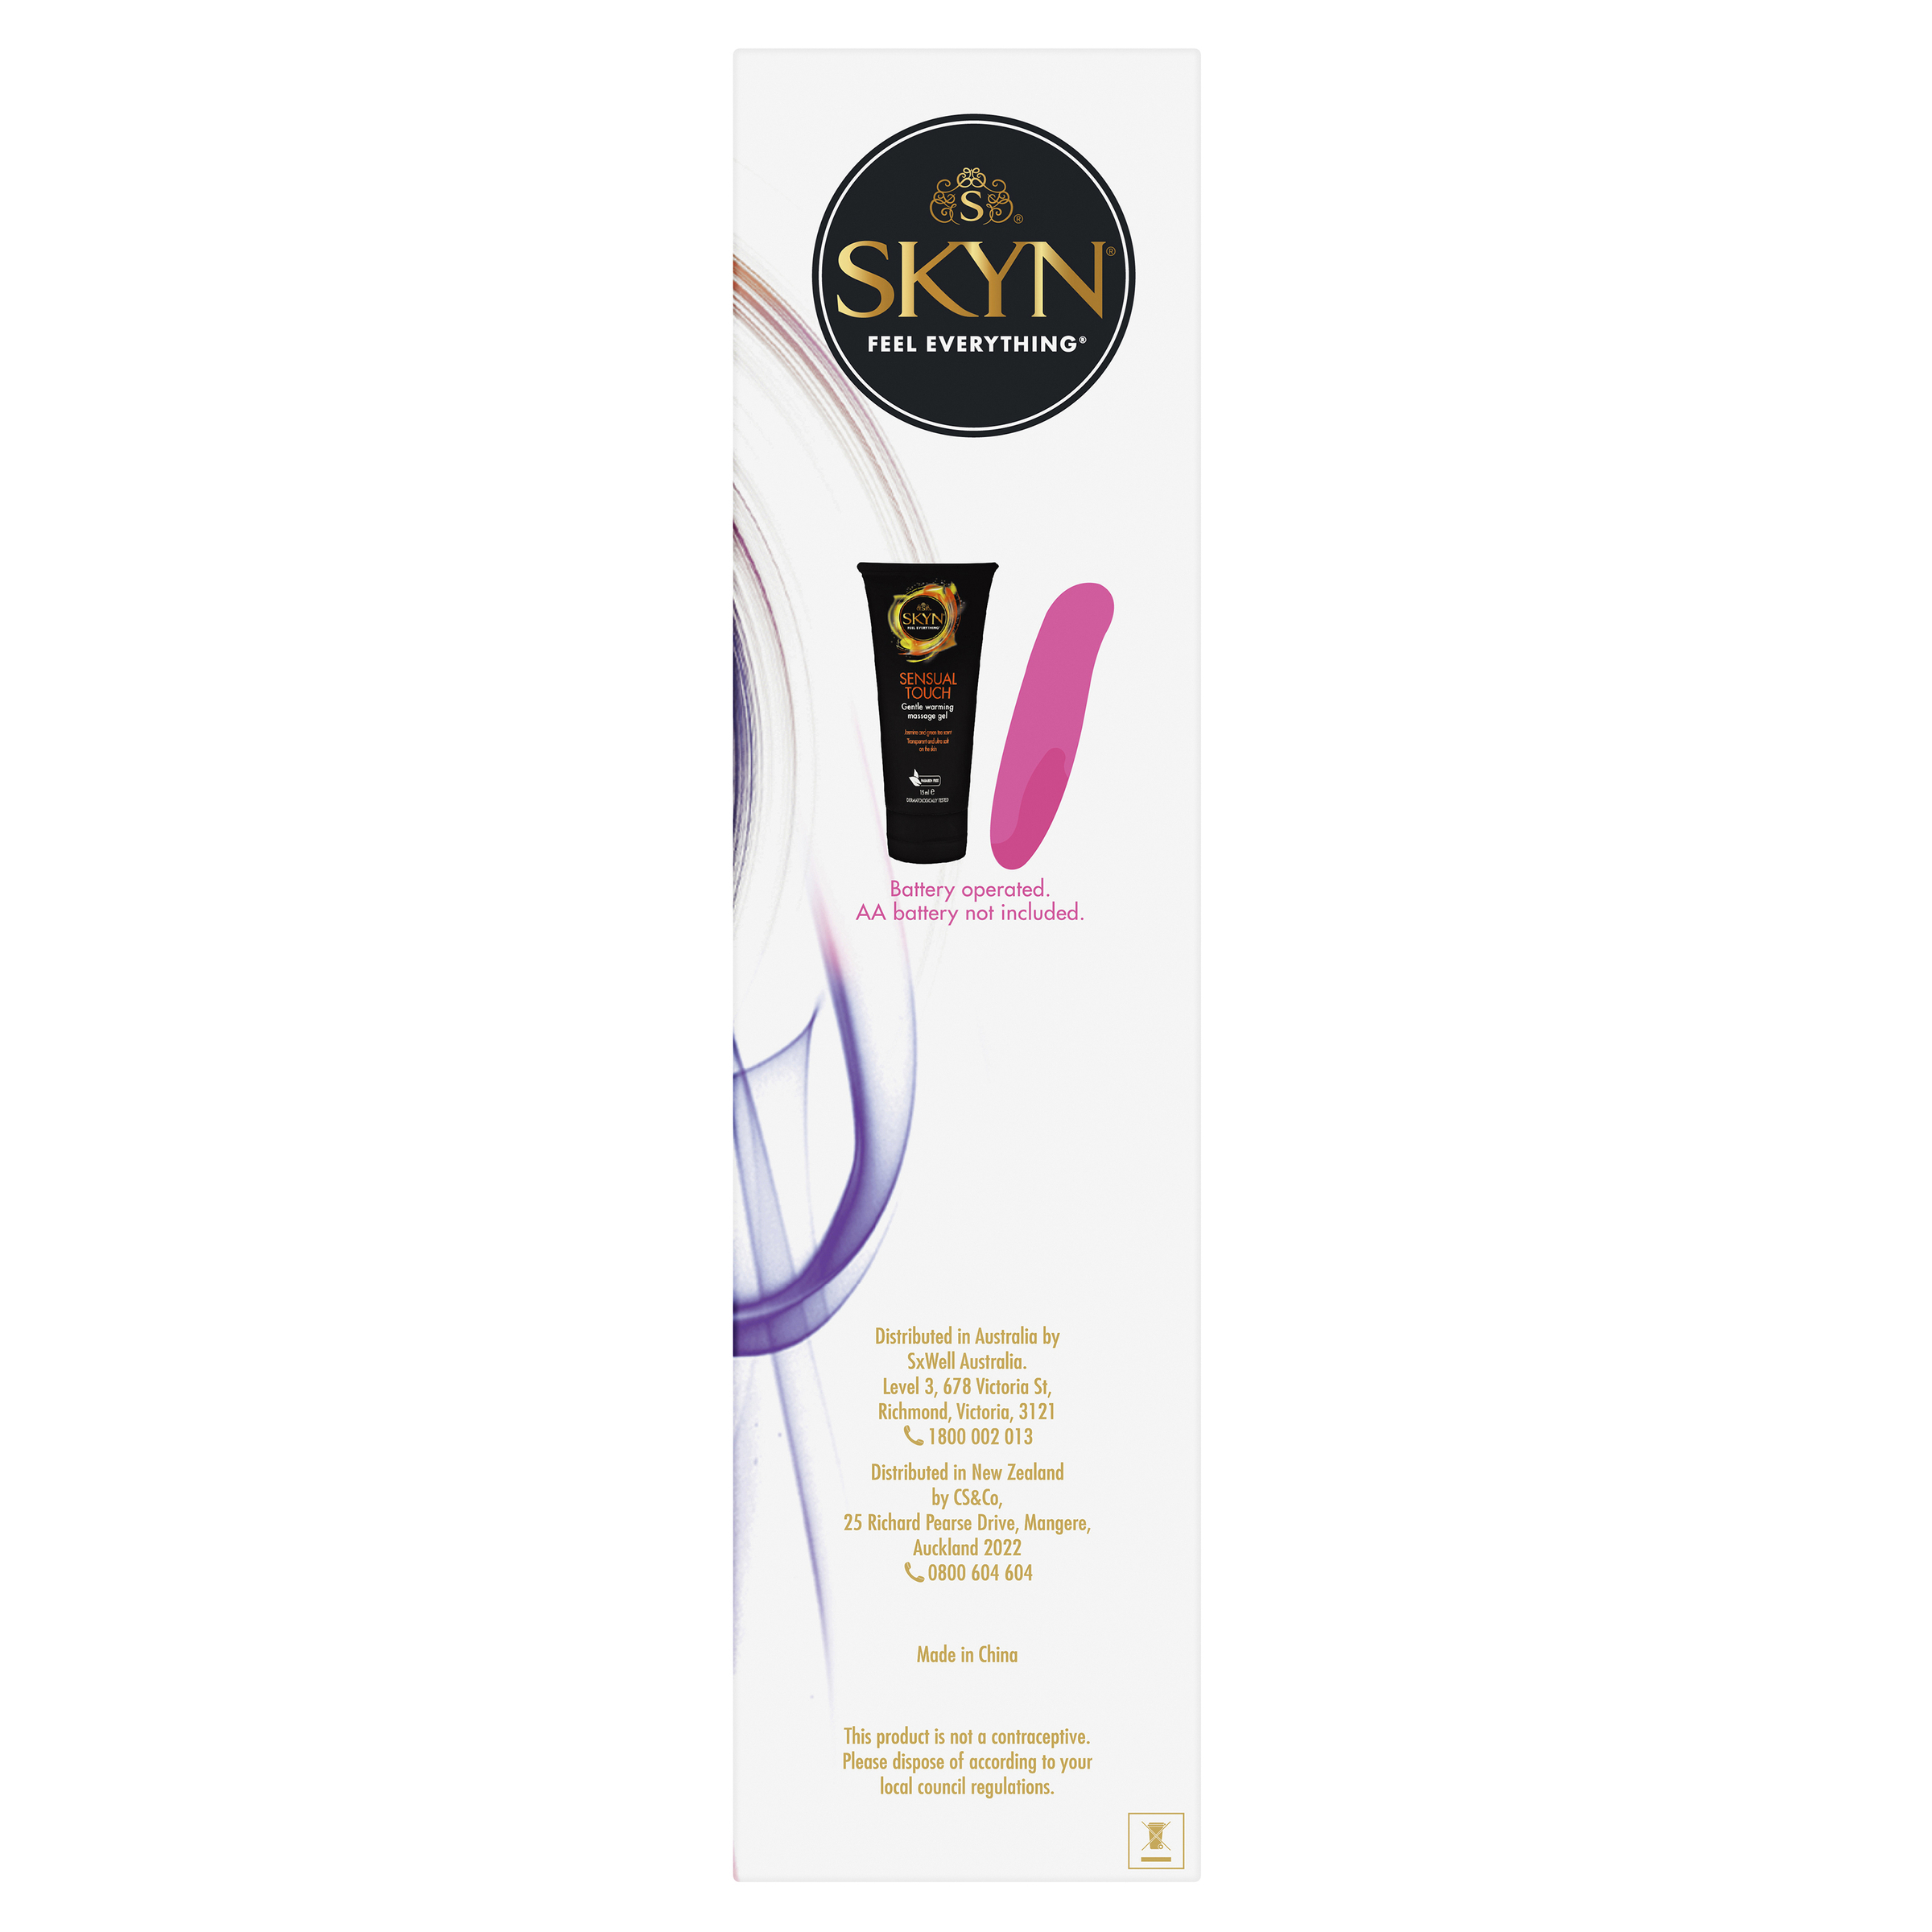 SKYN® Pulse Ultimate Massager Pack - Contains 1 SKYN® Pulse + 1 SKYN® Sensual Touch